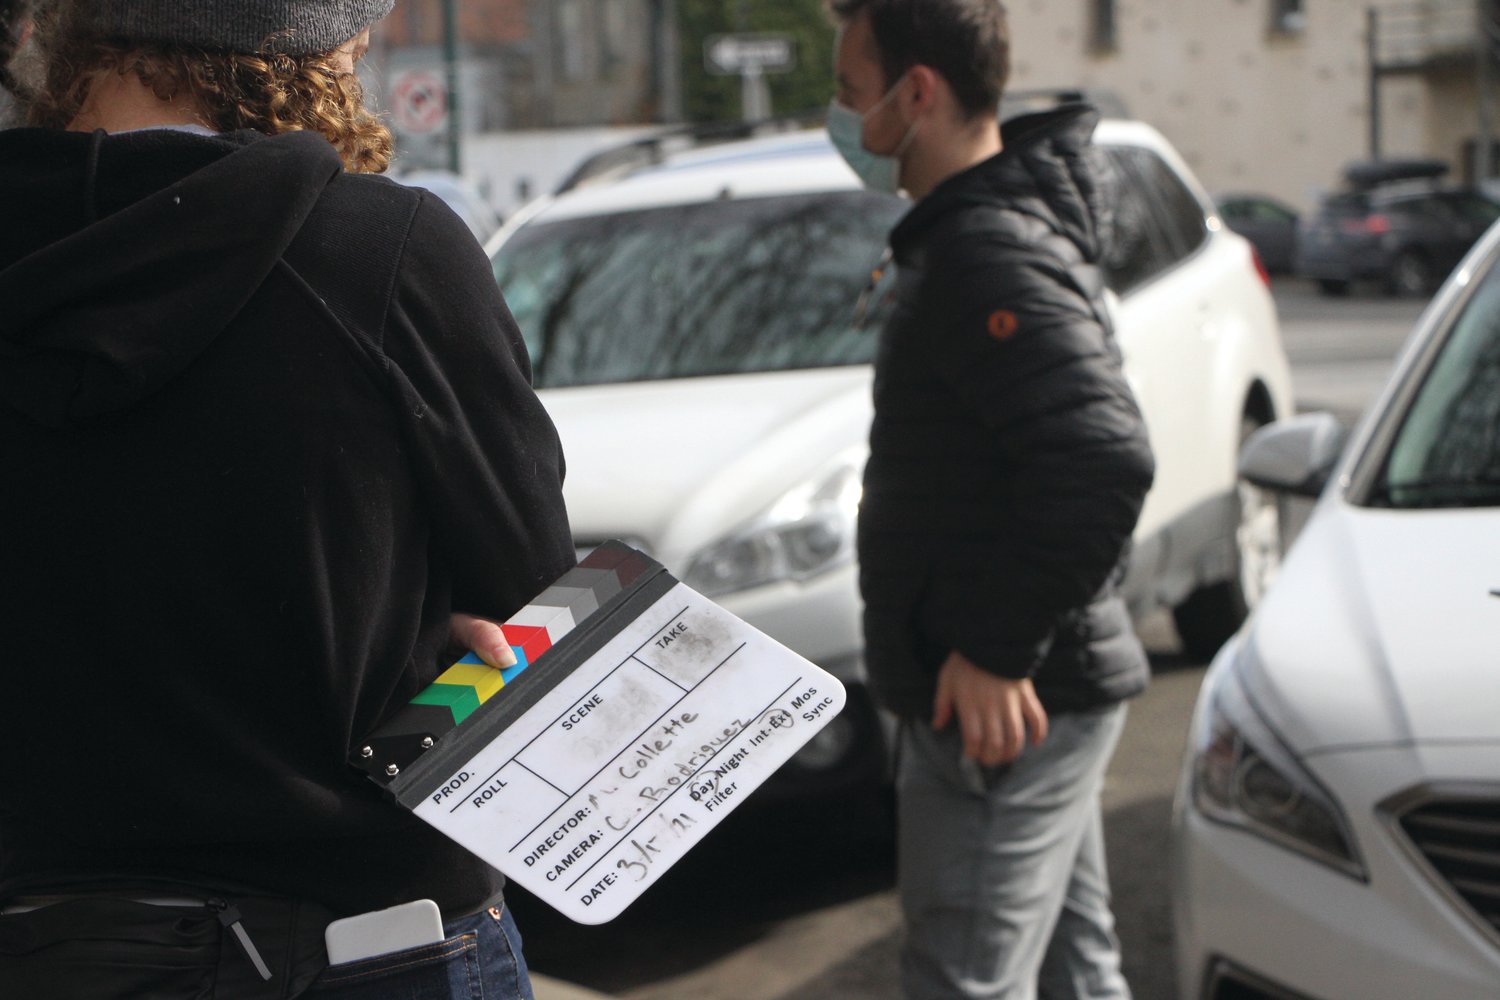 A clapboard sets out the next scene.